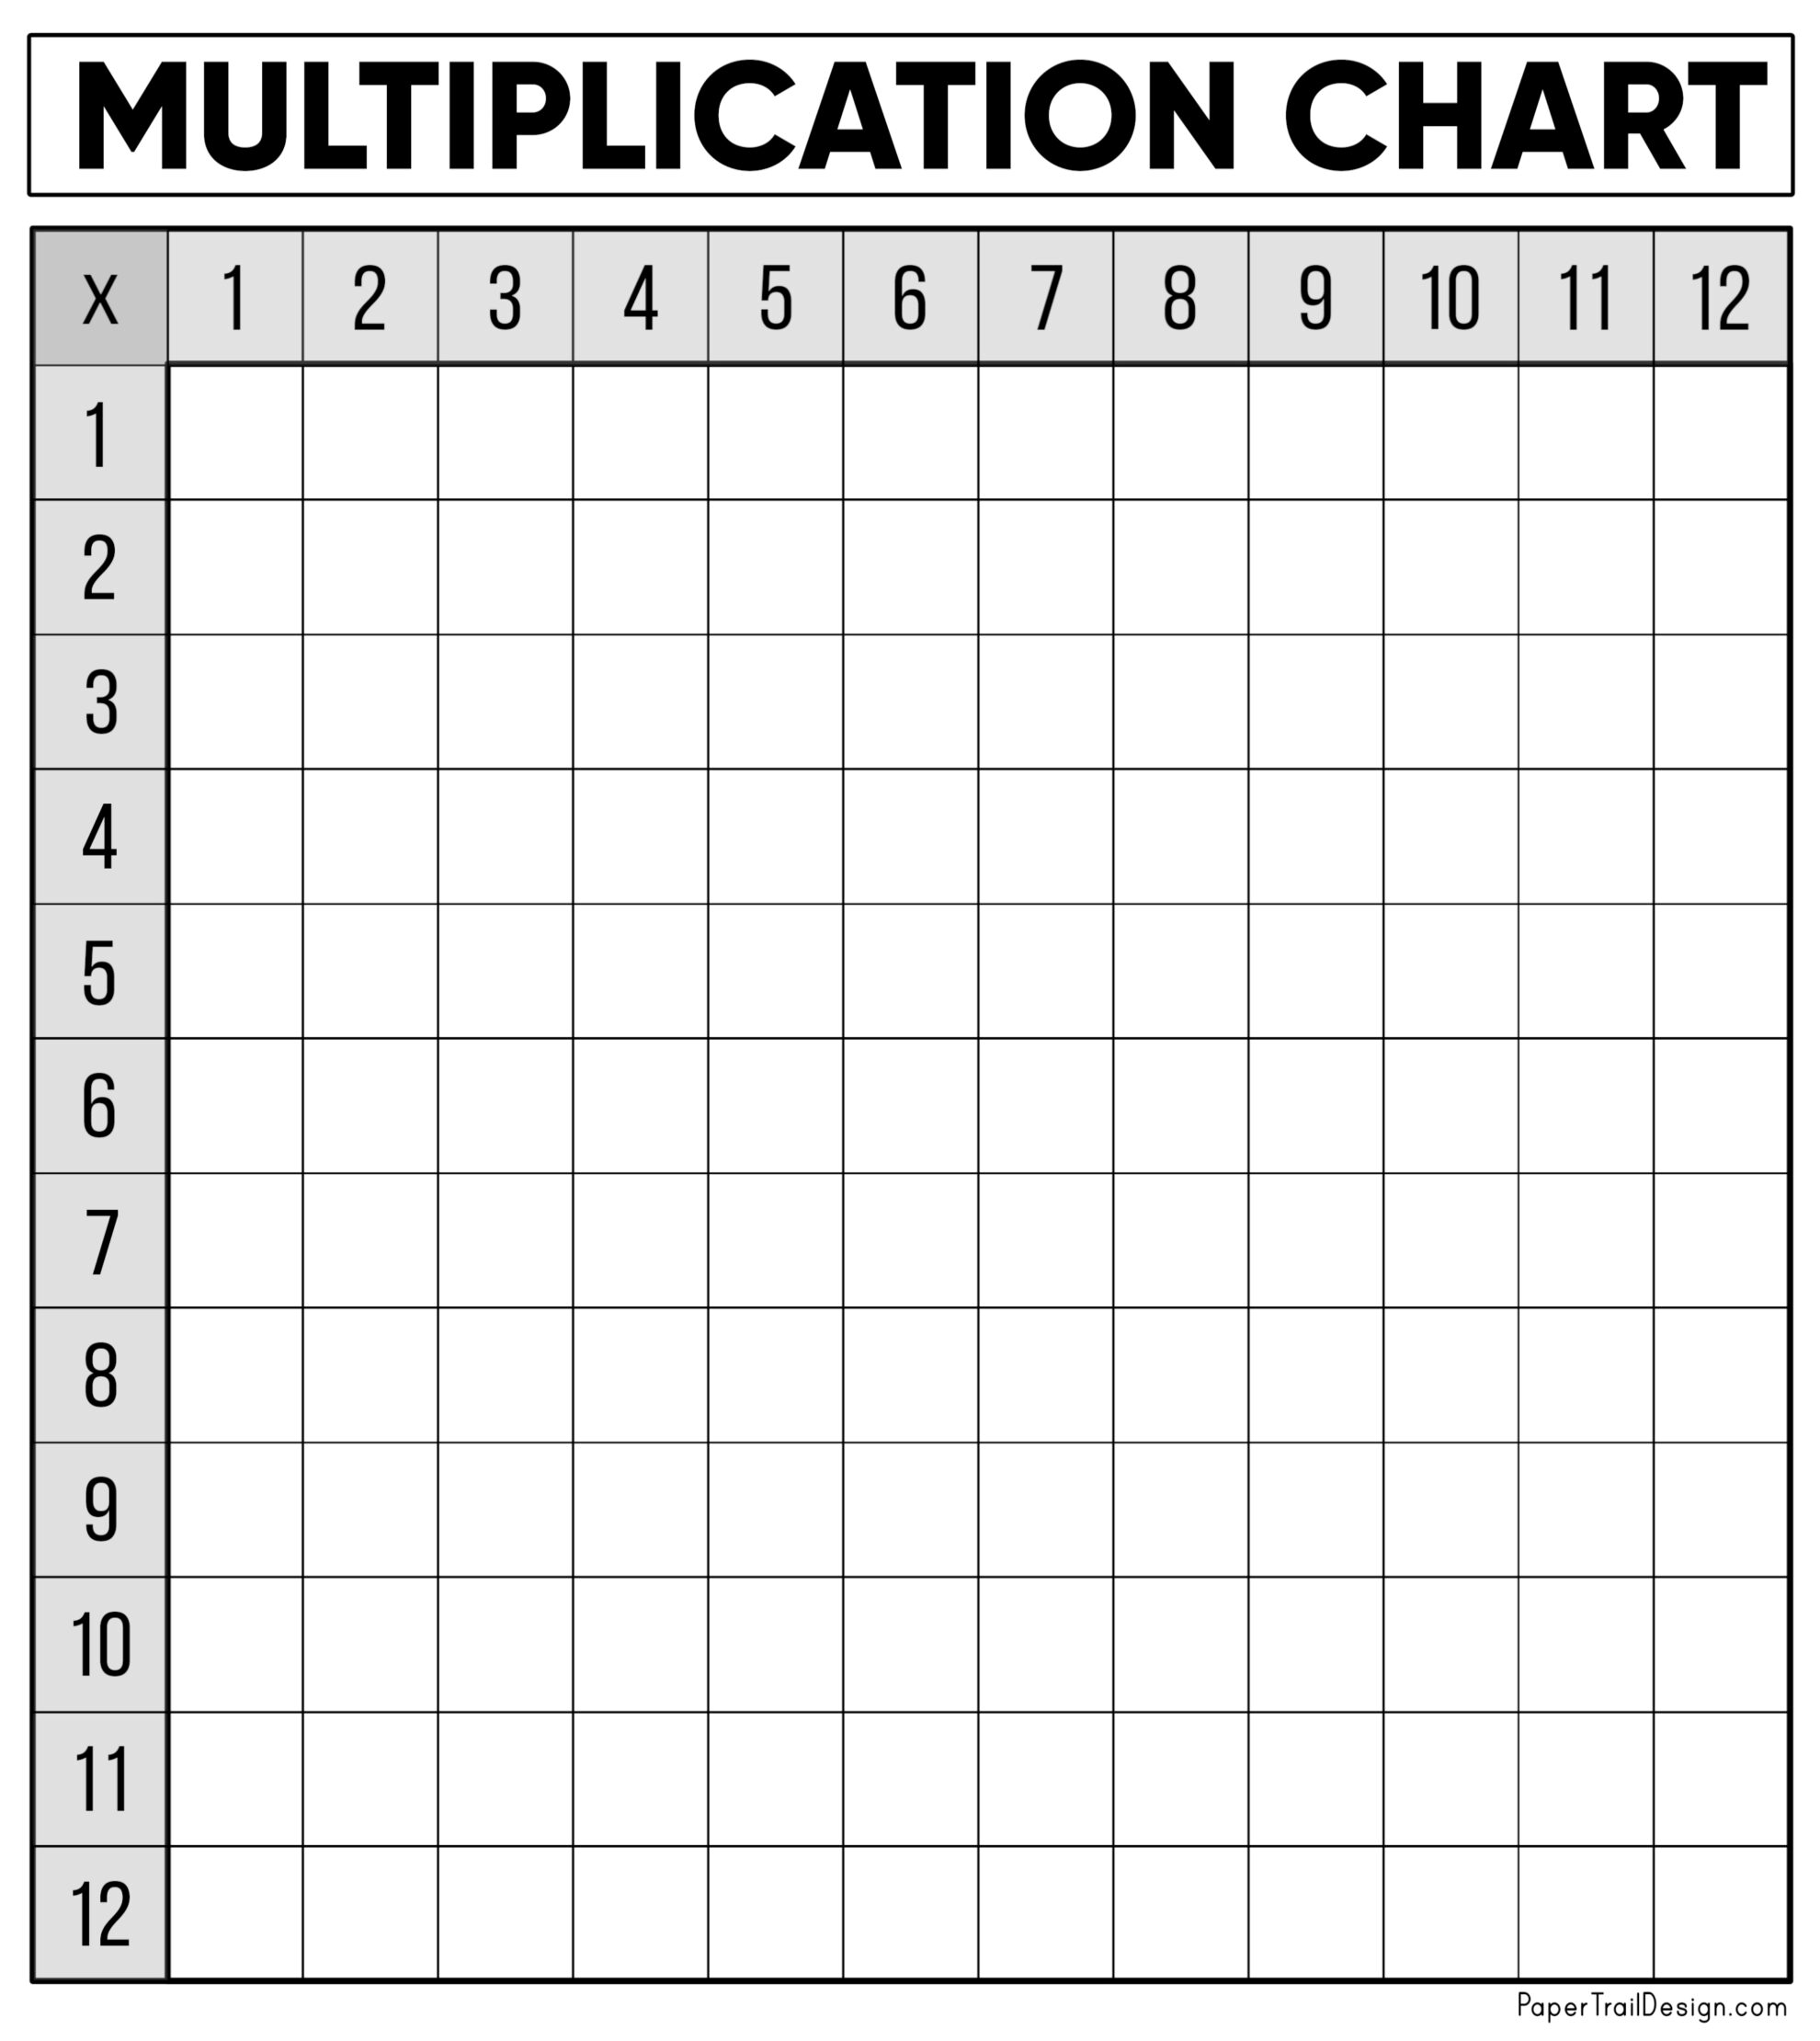 multiplication table print out chart